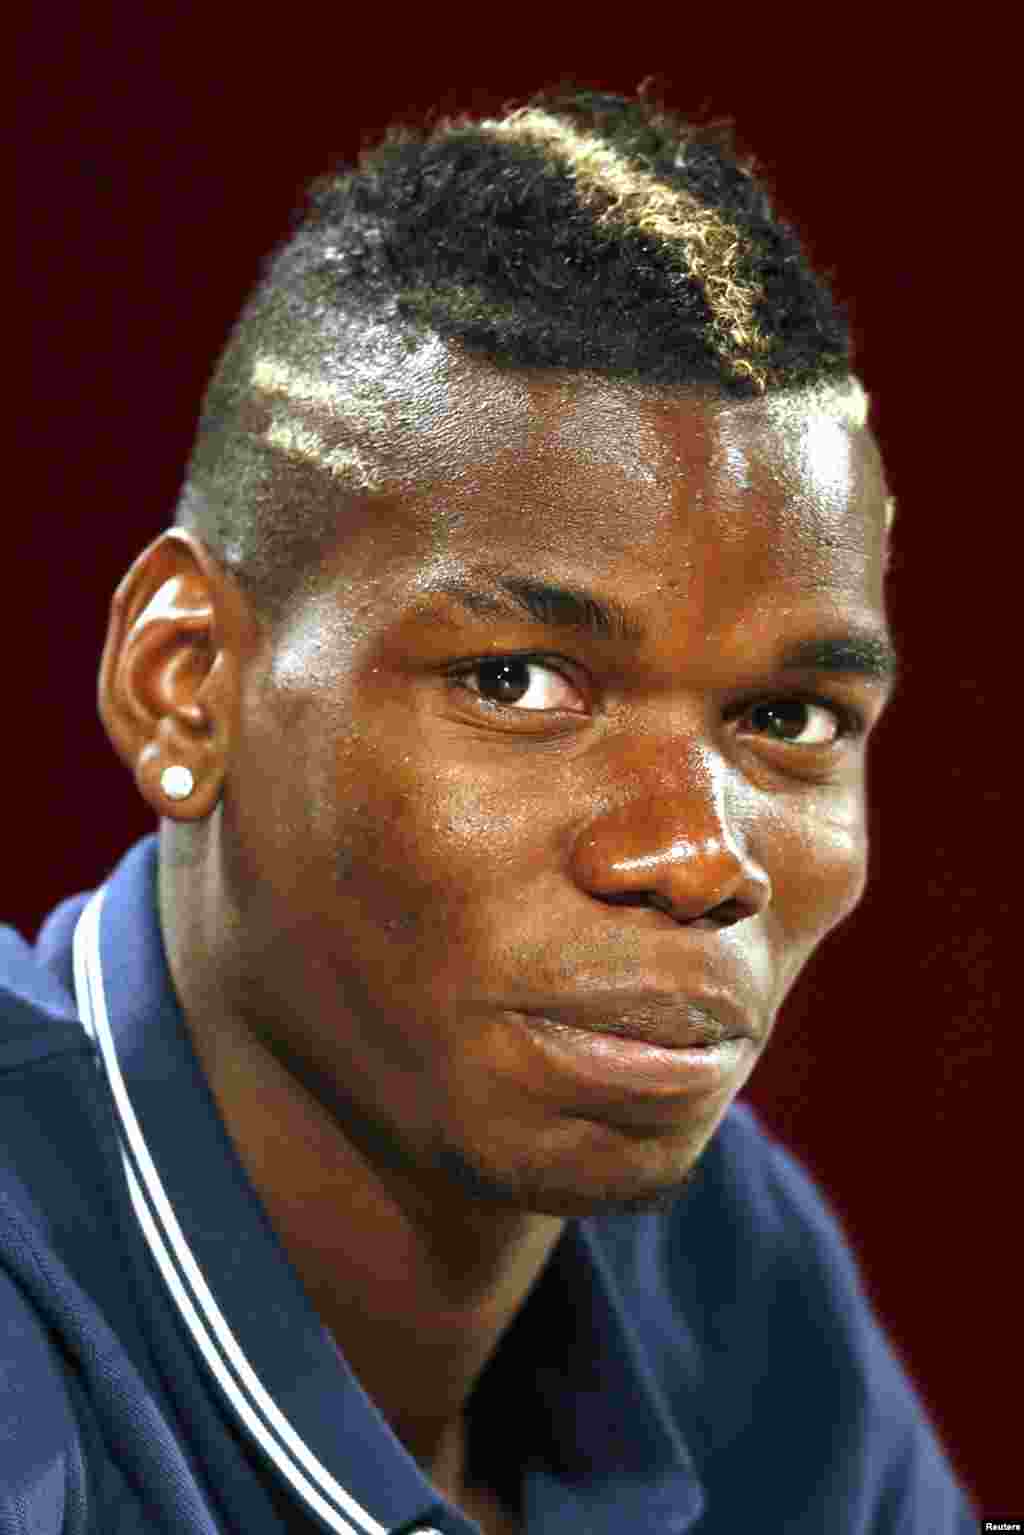 France&#39;s national soccer team player Paul Pogba attends a news conference, ahead of the 2014 World Cup, at the theatre Pedro II in Ribeirao Preto June 10, 2014. REUTERS/Charles Platiau